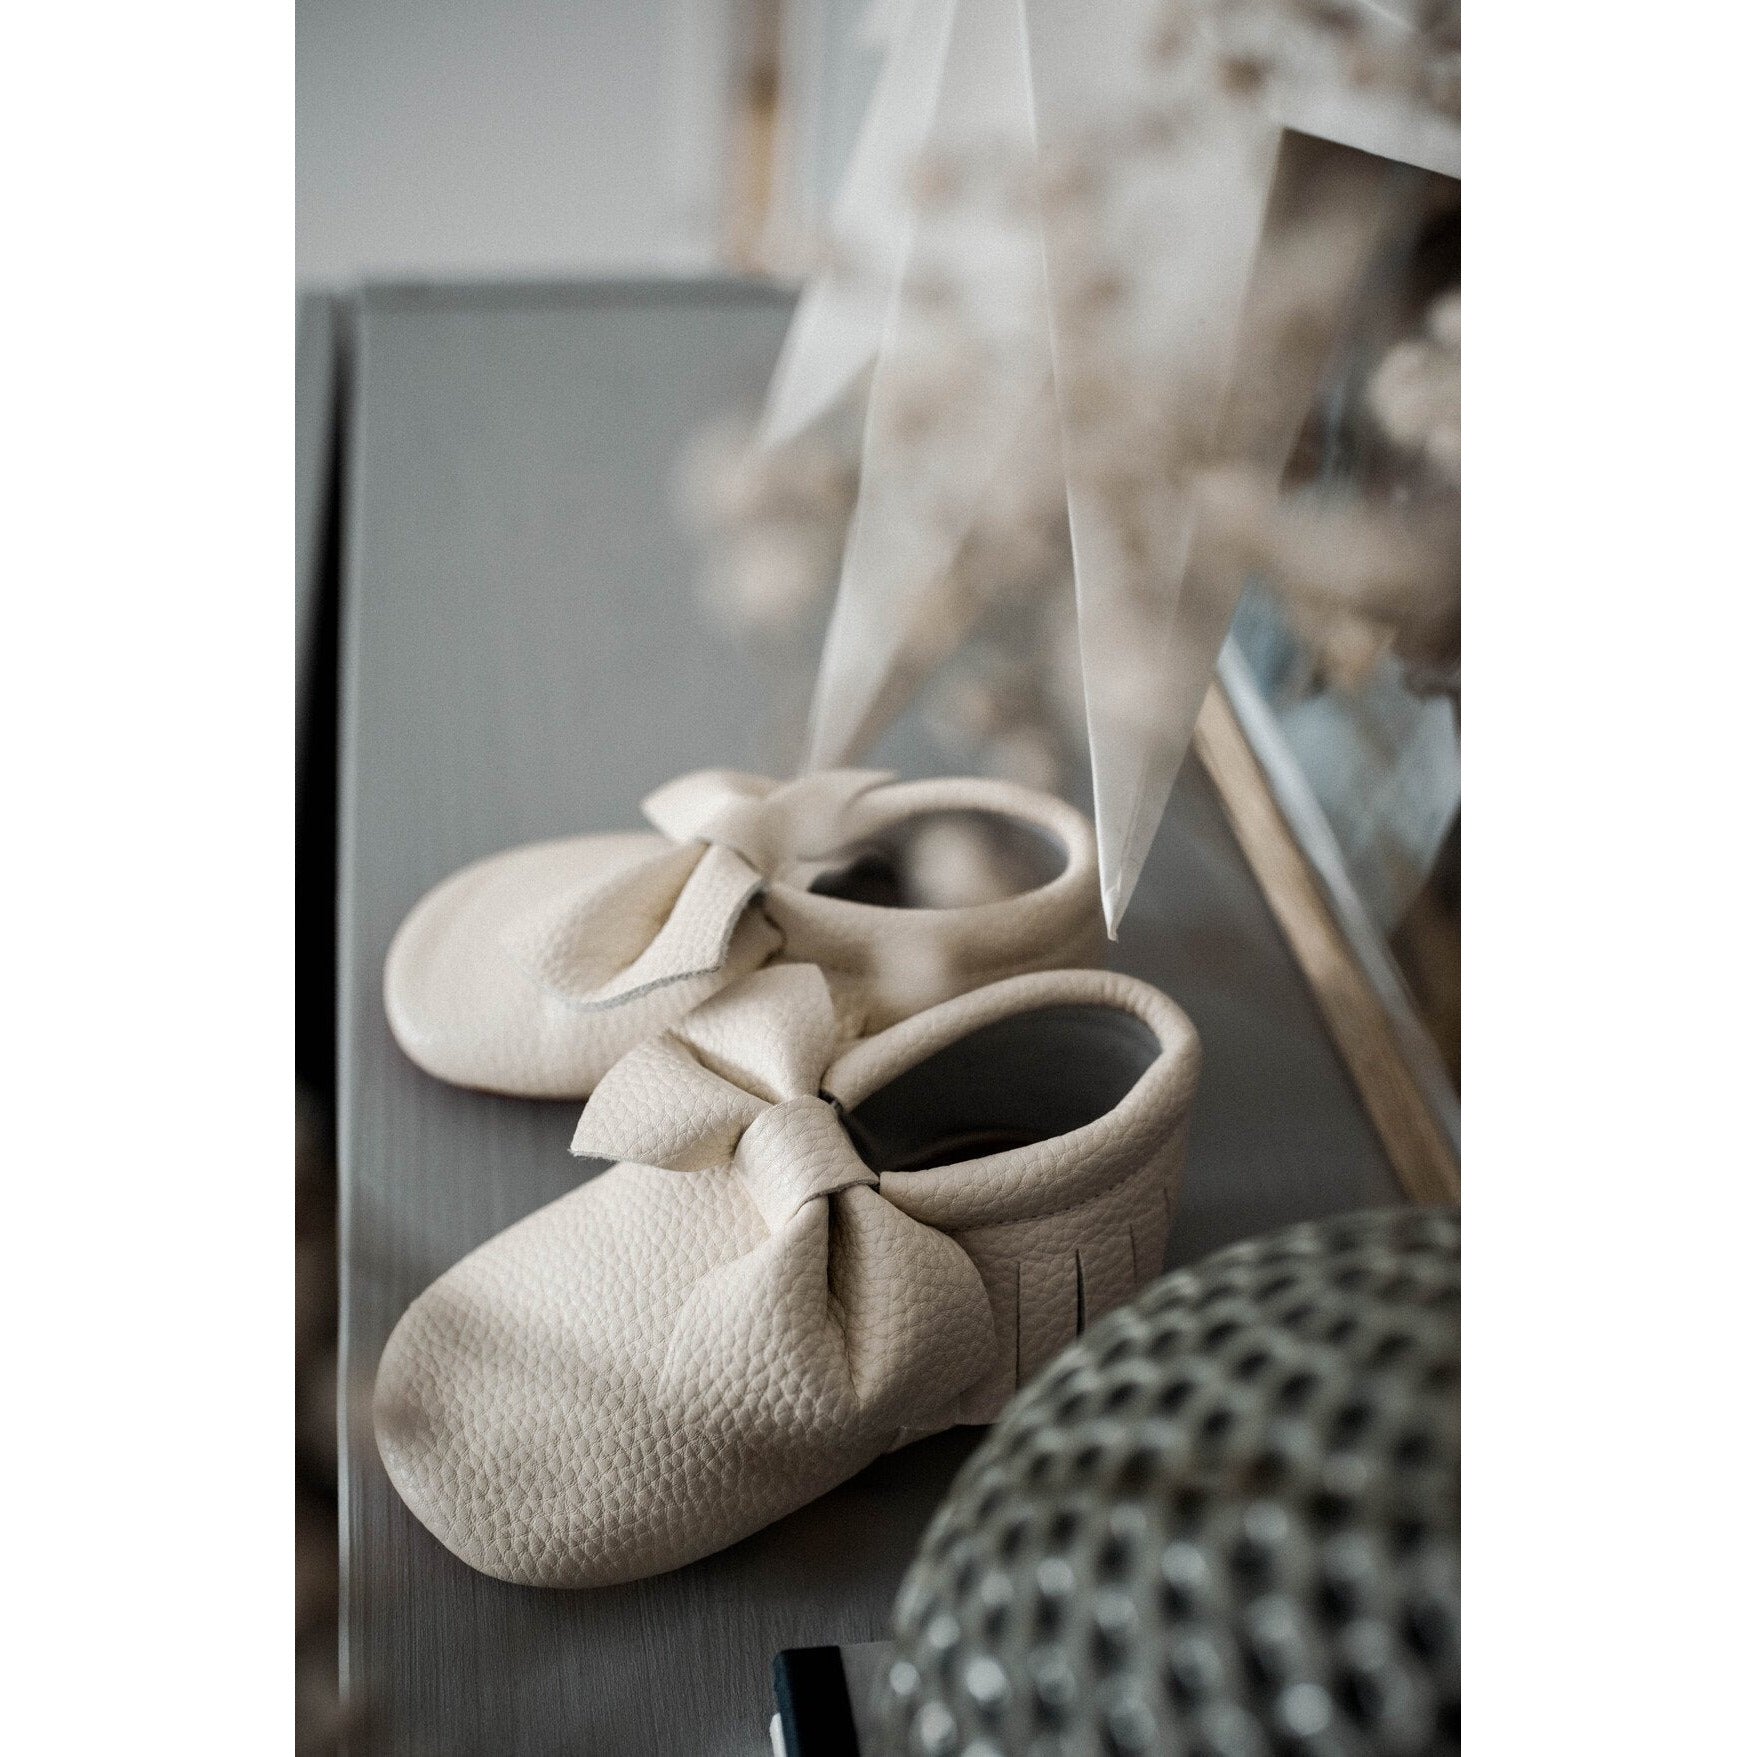 Vegan Baby Shoes from Sweden